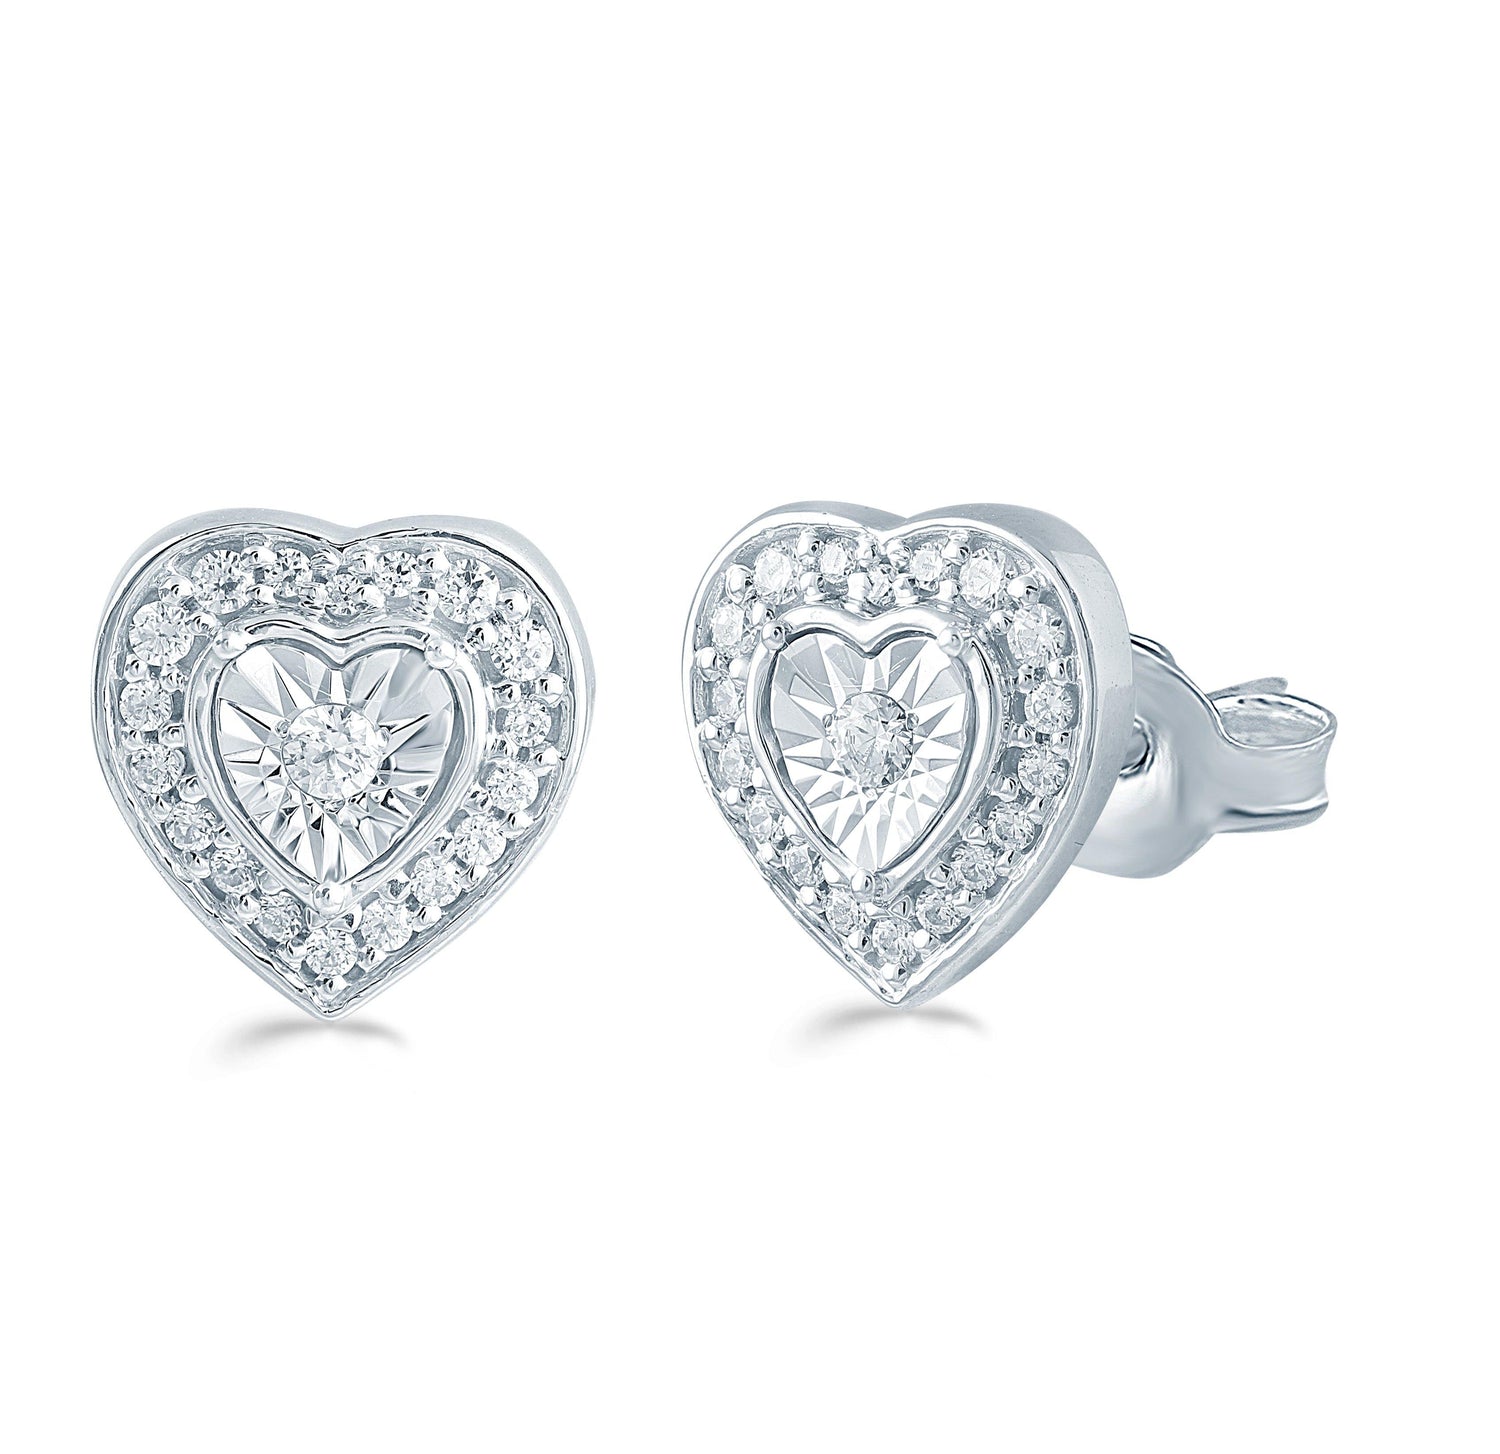 1/4Ct TW Diamond Heart Cluster Fashion Stud Earring in Sterling Silver - Fifth and Fine